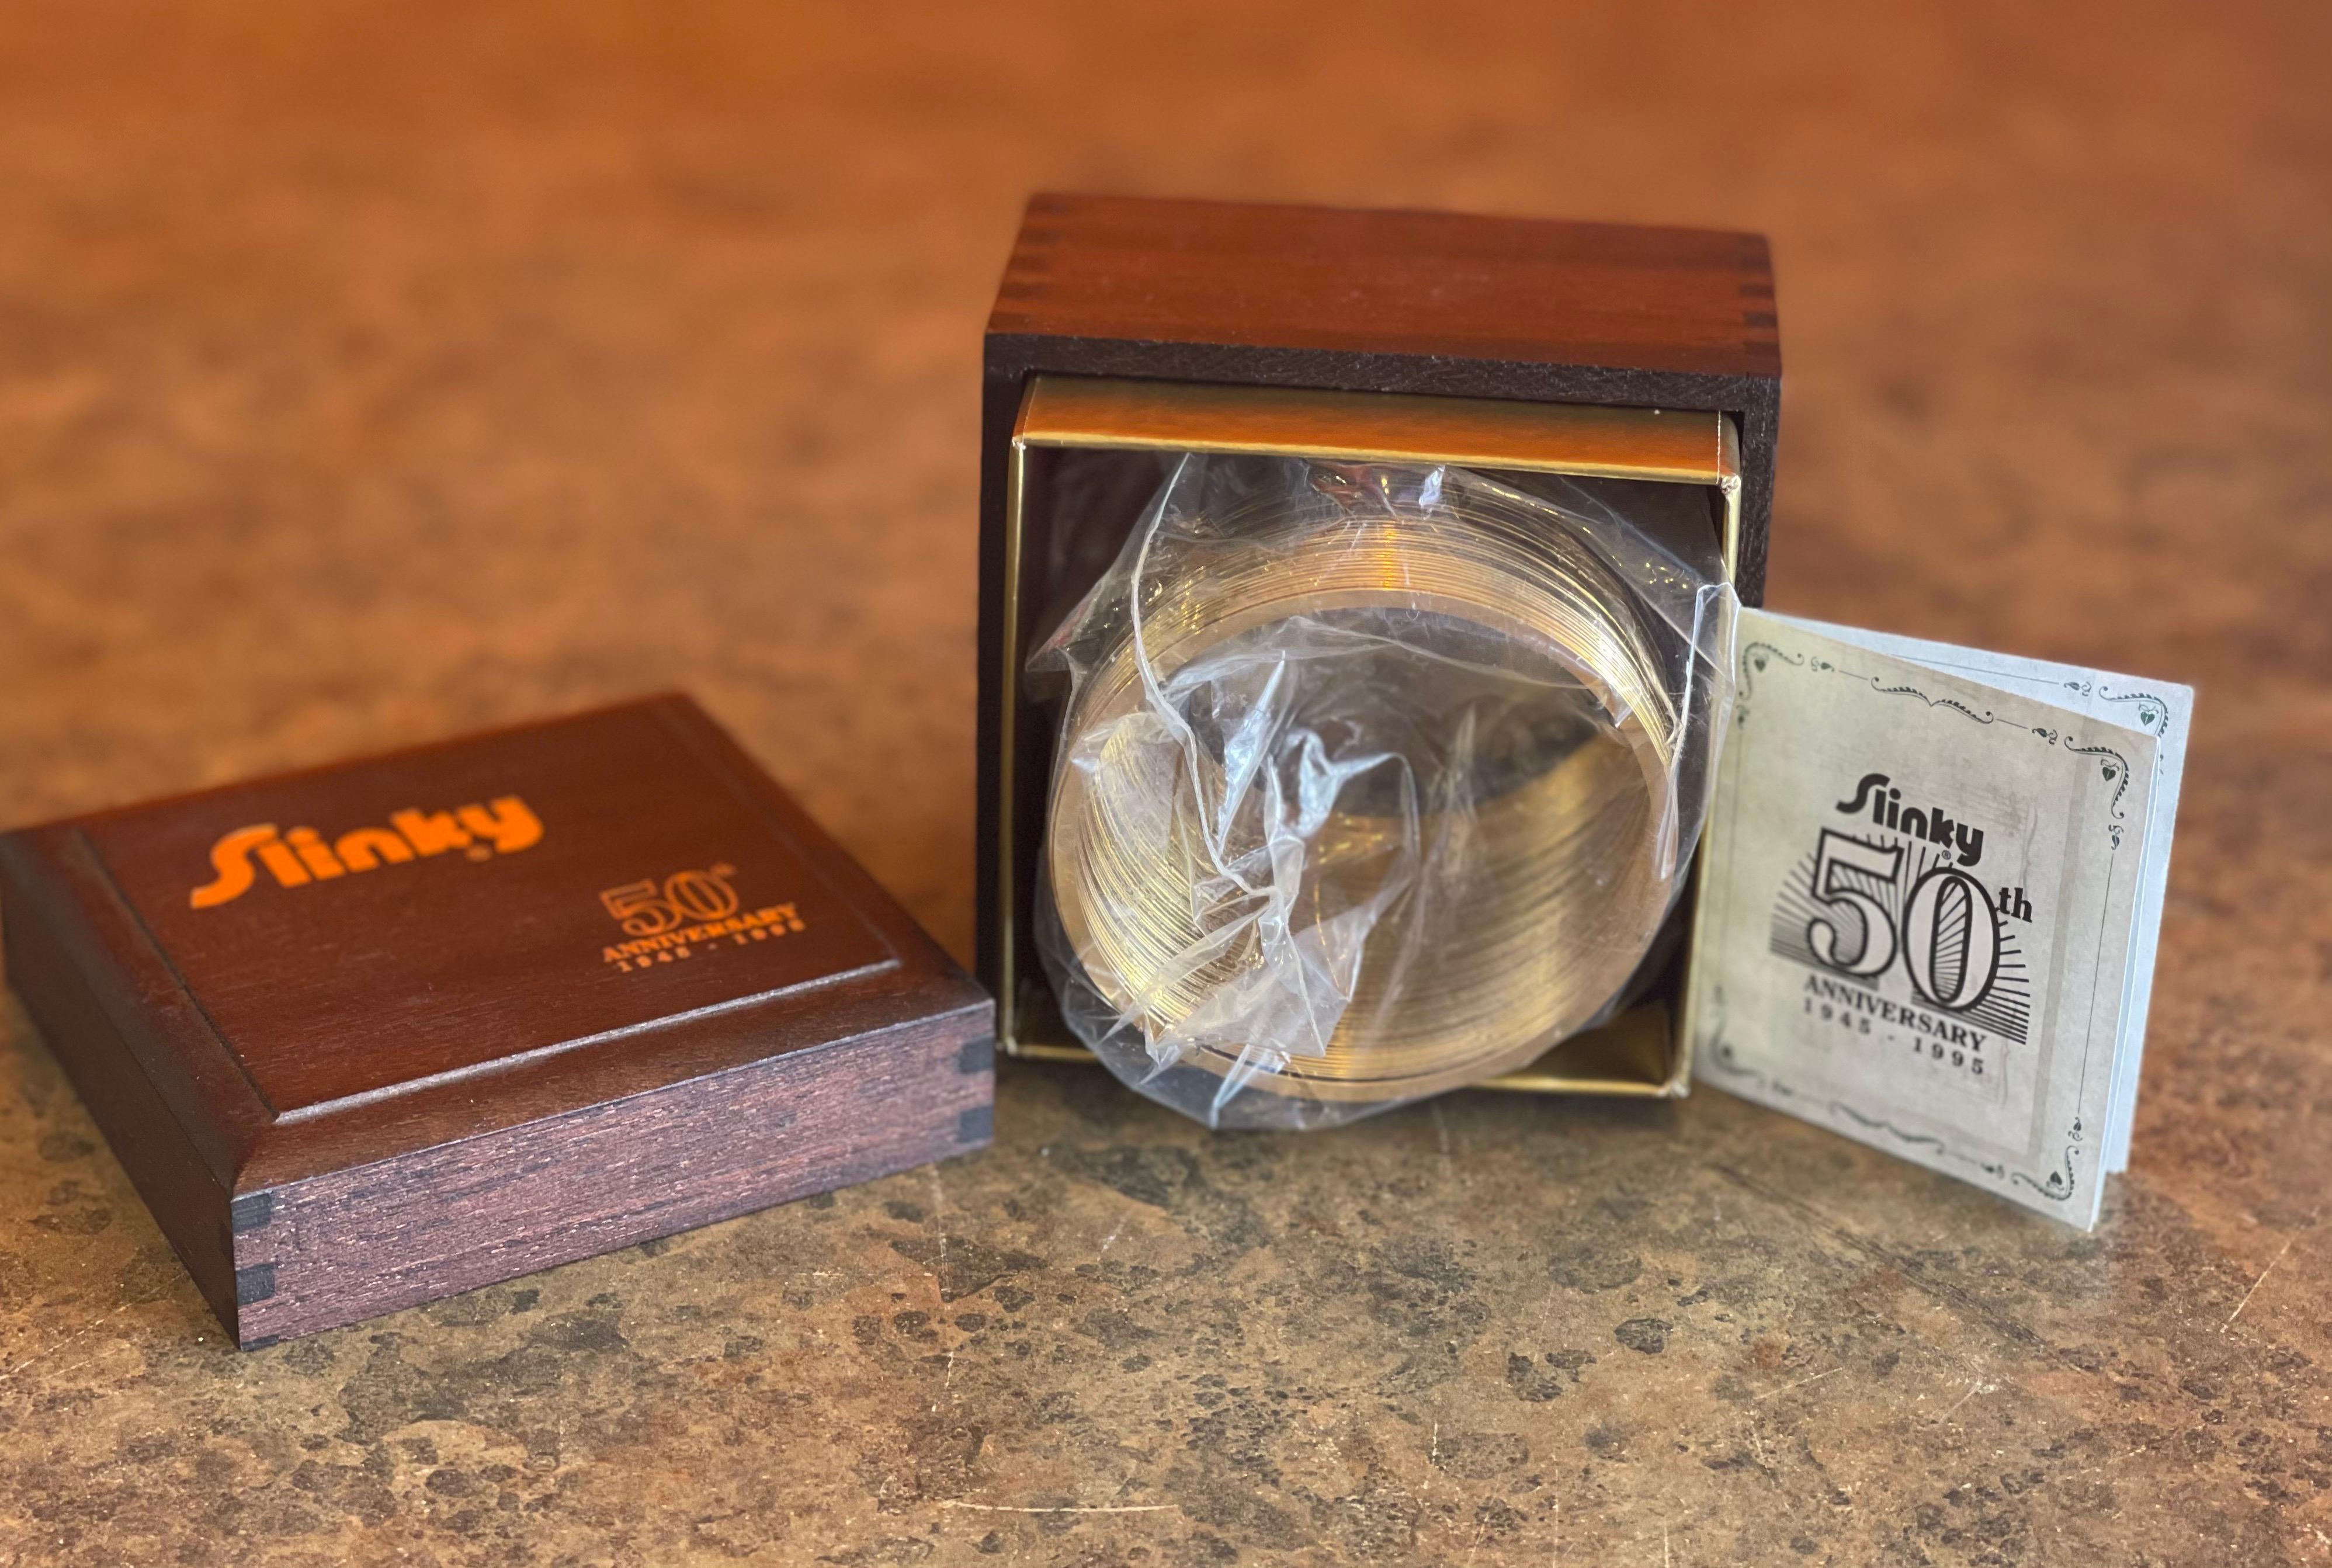 20th Century 50th Anniversary Gold-Plated Slinky Toy in Wood Box